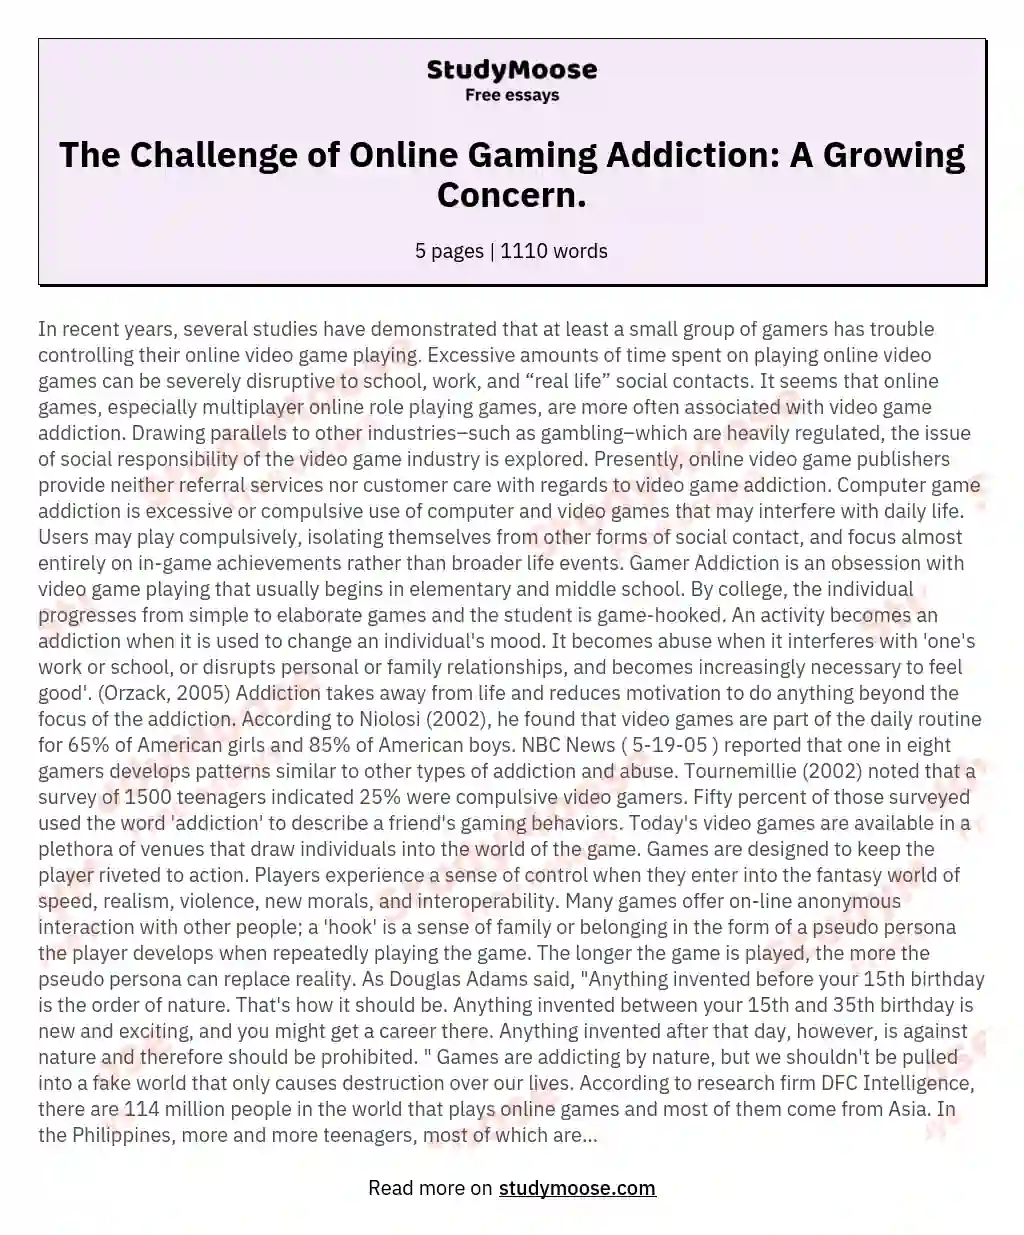 The Challenge of Online Gaming Addiction: A Growing Concern. essay